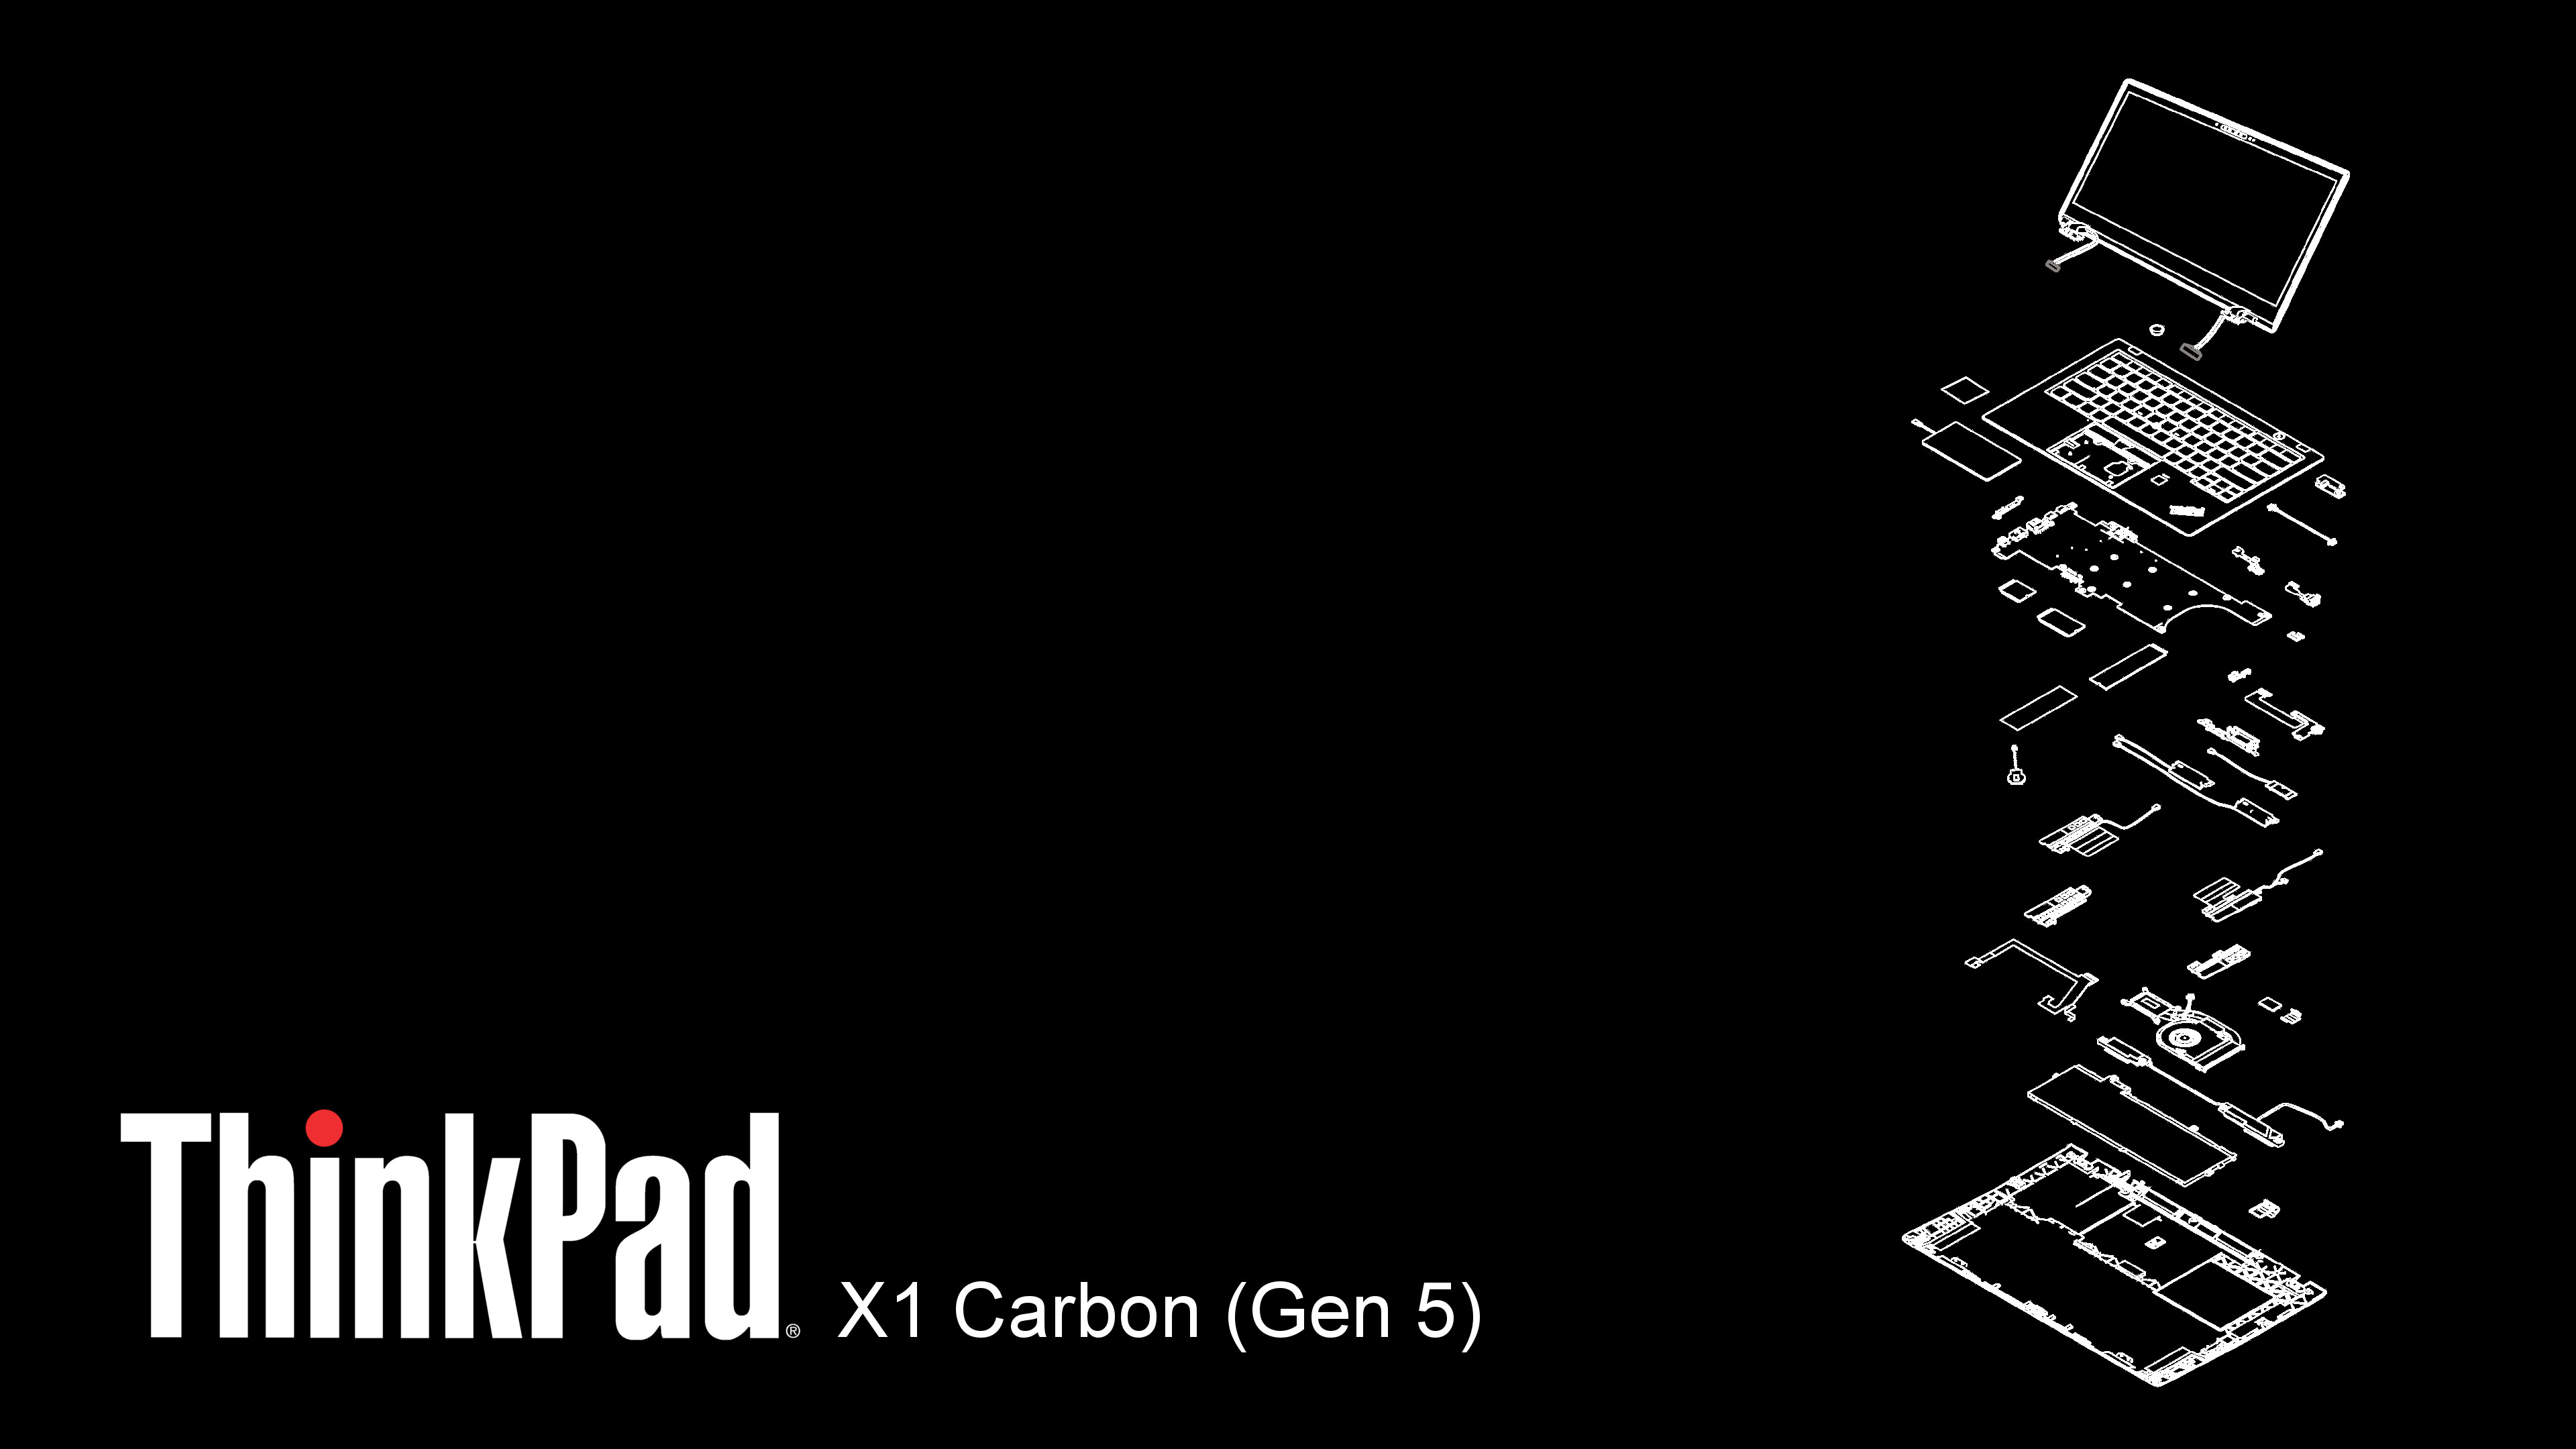 I Made An Exploded Wallpaper For The X1 Carbon Gen 5 3840x2160